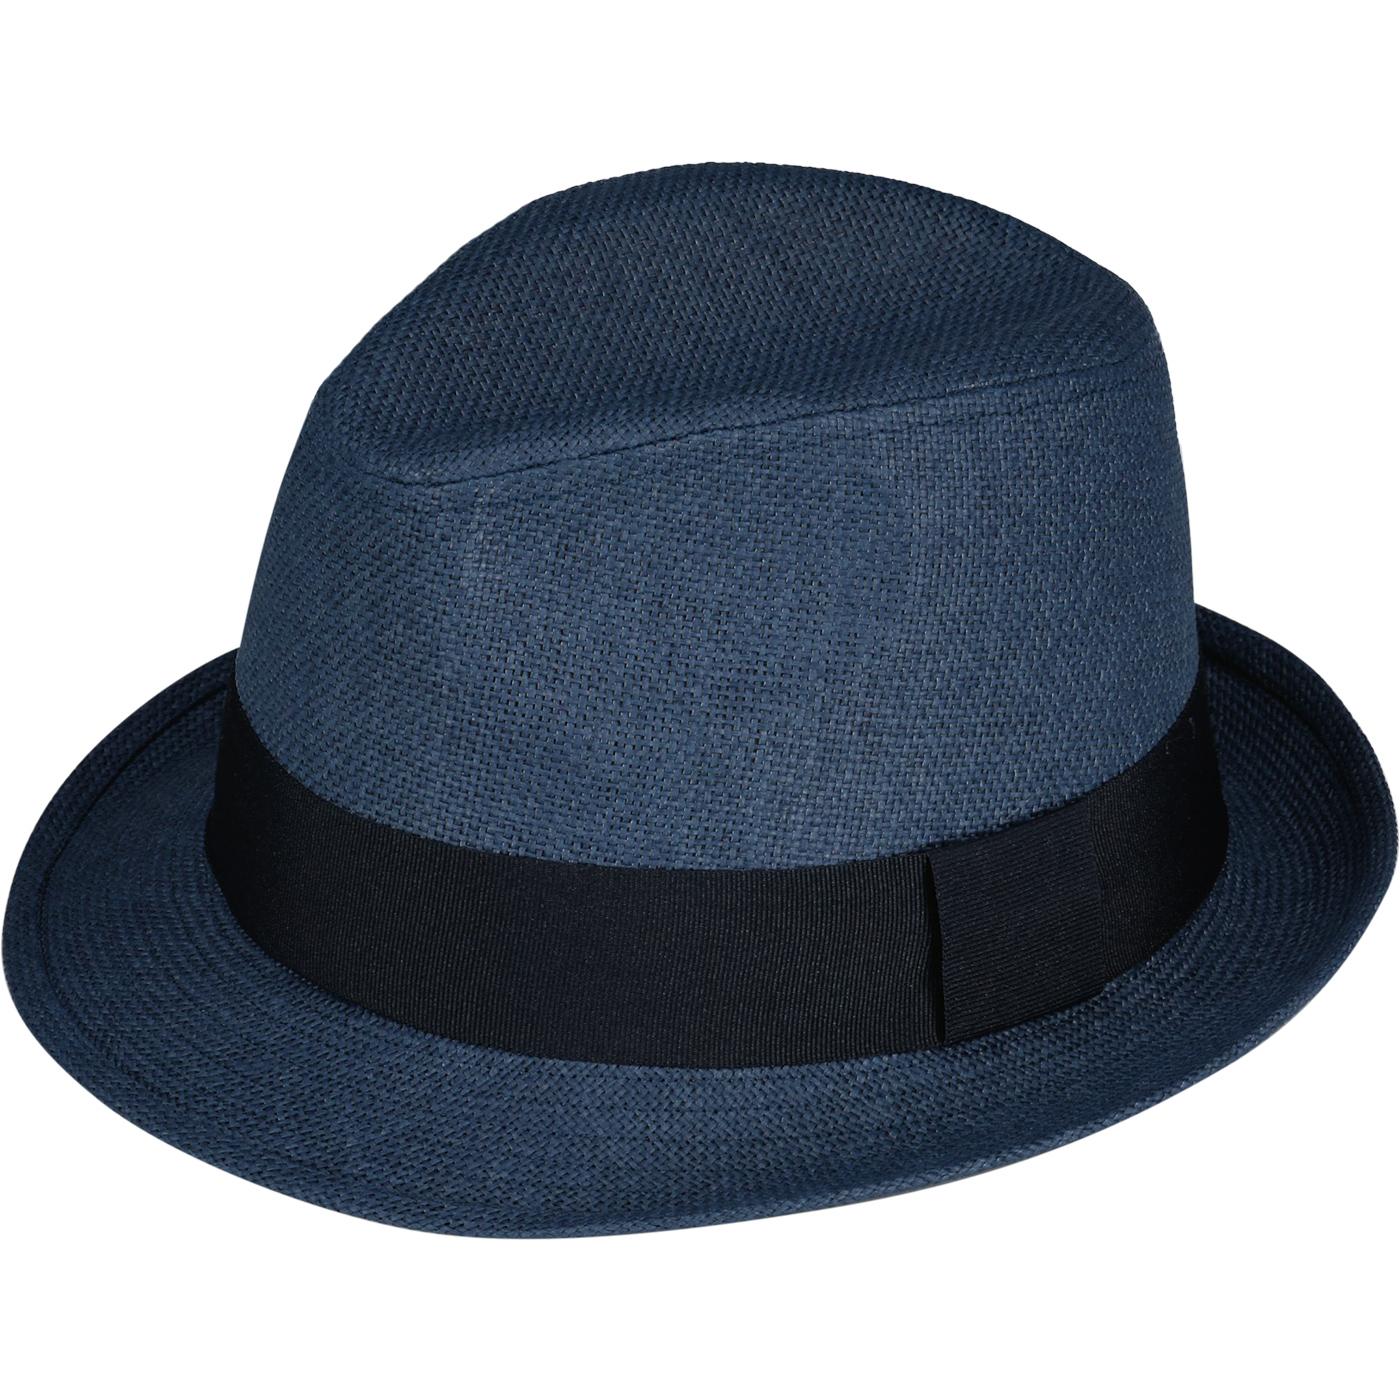 FAILSWORTH Retro 70s Paperstraw Trilby Hat (Navy)